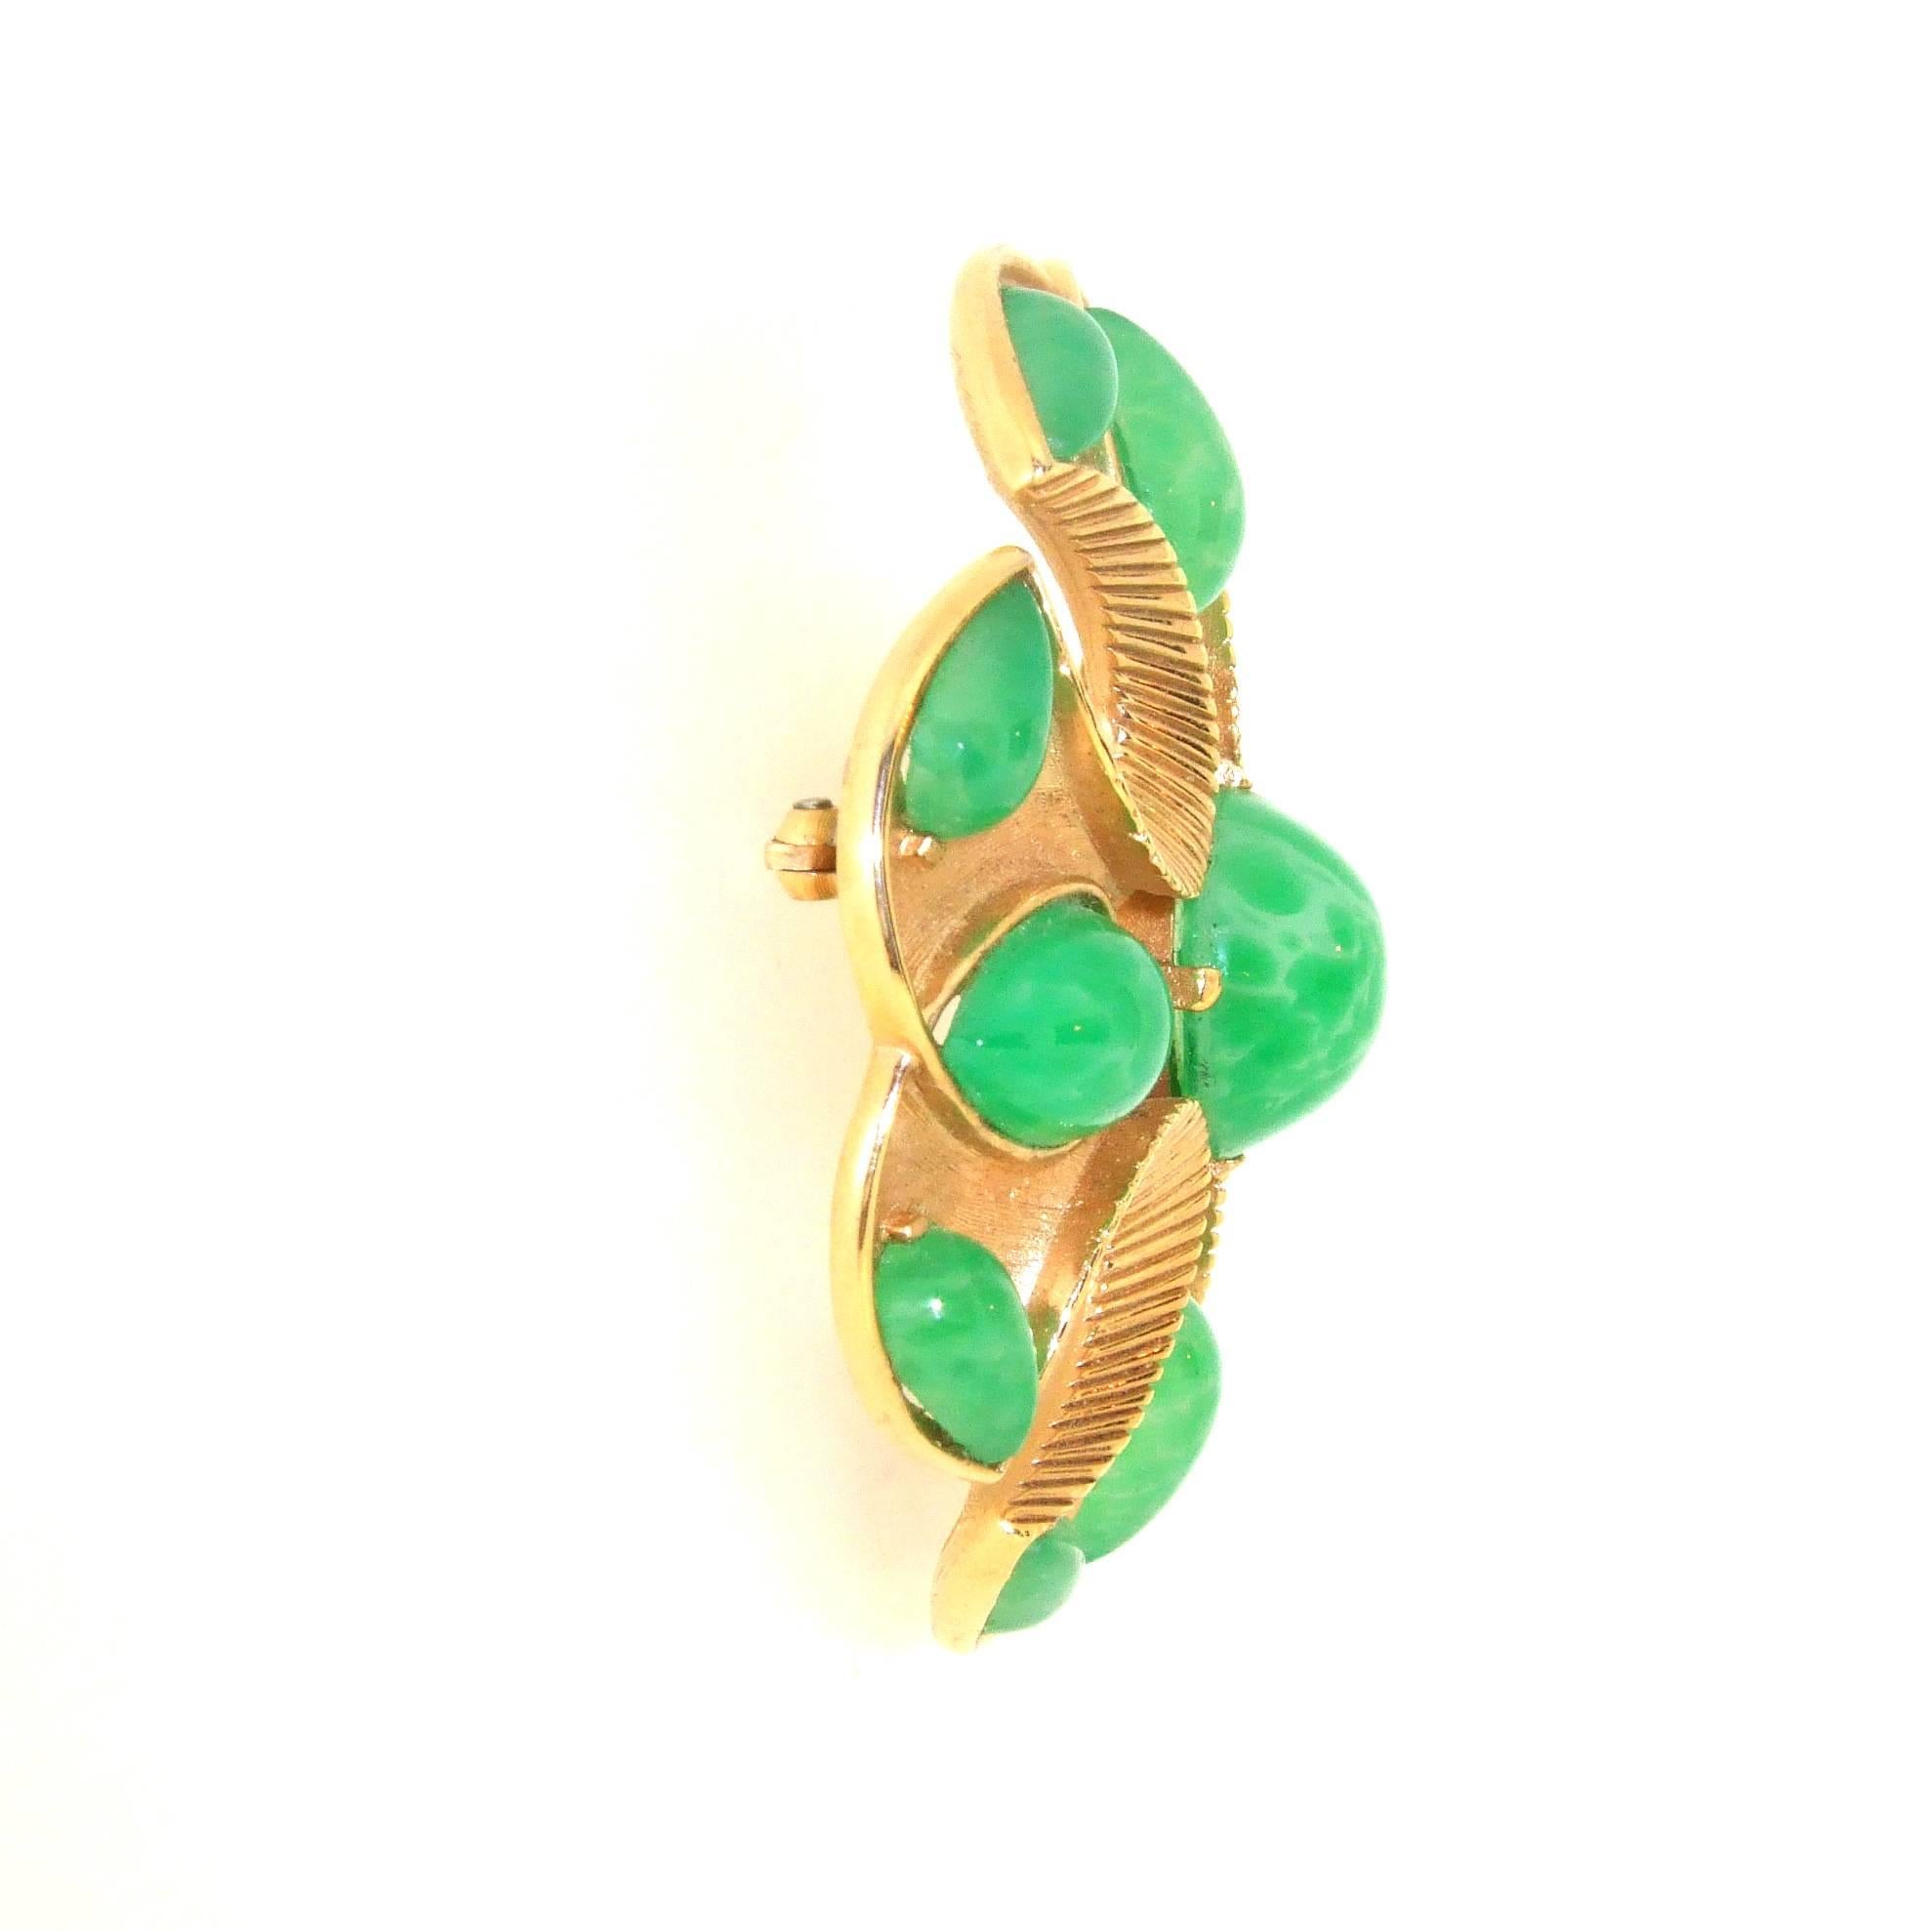 A vintage brooch in a Maltese shaped cross by Trifari from the Jewels of India Collection 1965 with jade effect vintage glass.

Trifari was founded in the USA by Italian Gustavo Trifari in 1910. Chief designer of Trifari between 1930 and 1968 was